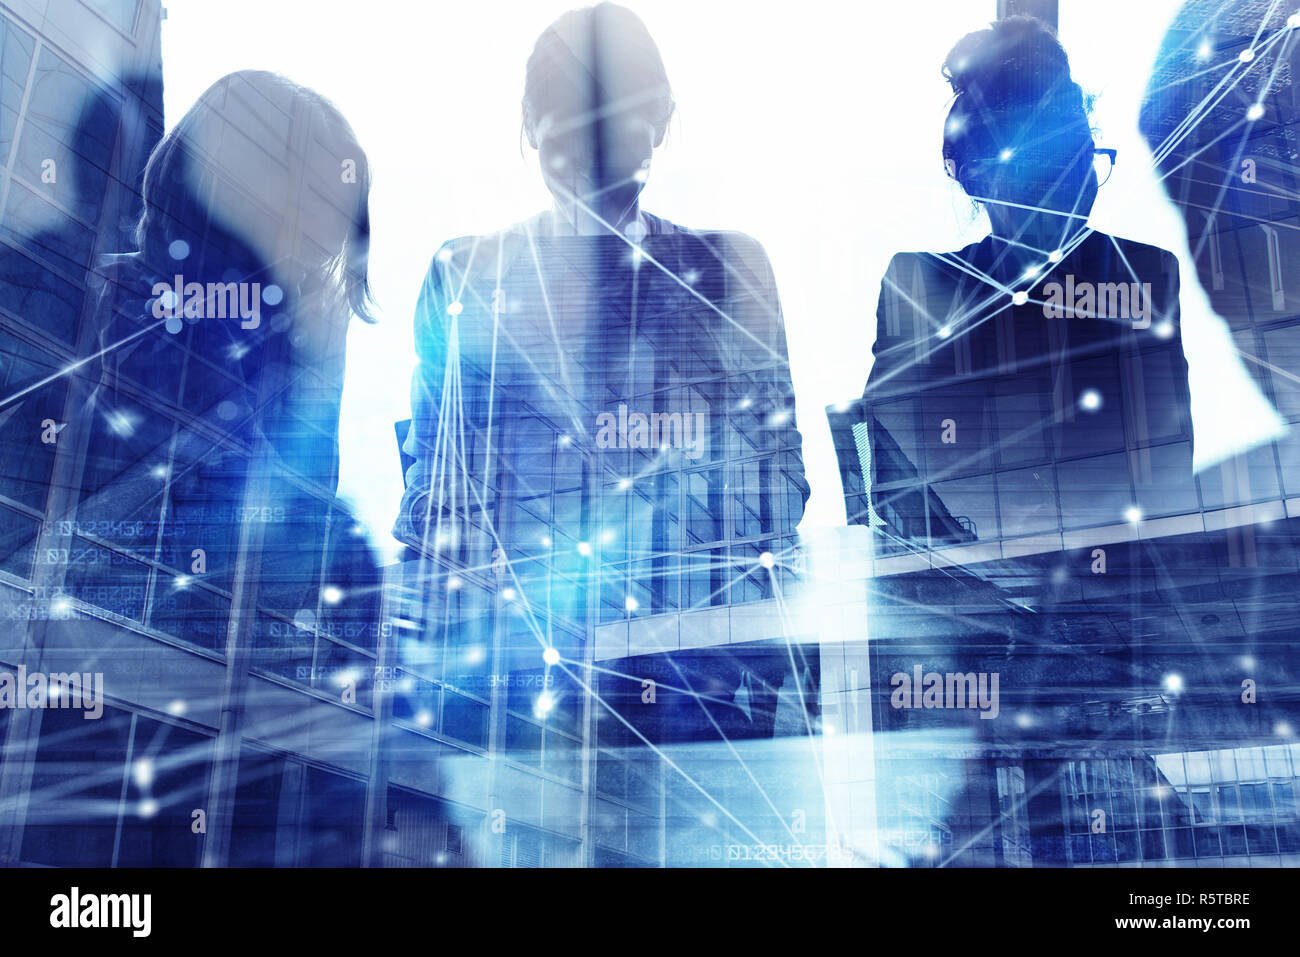 Silhouette of business people working together in office. Concept of teamwork and partnership. double exposure with network effects Stock Photo